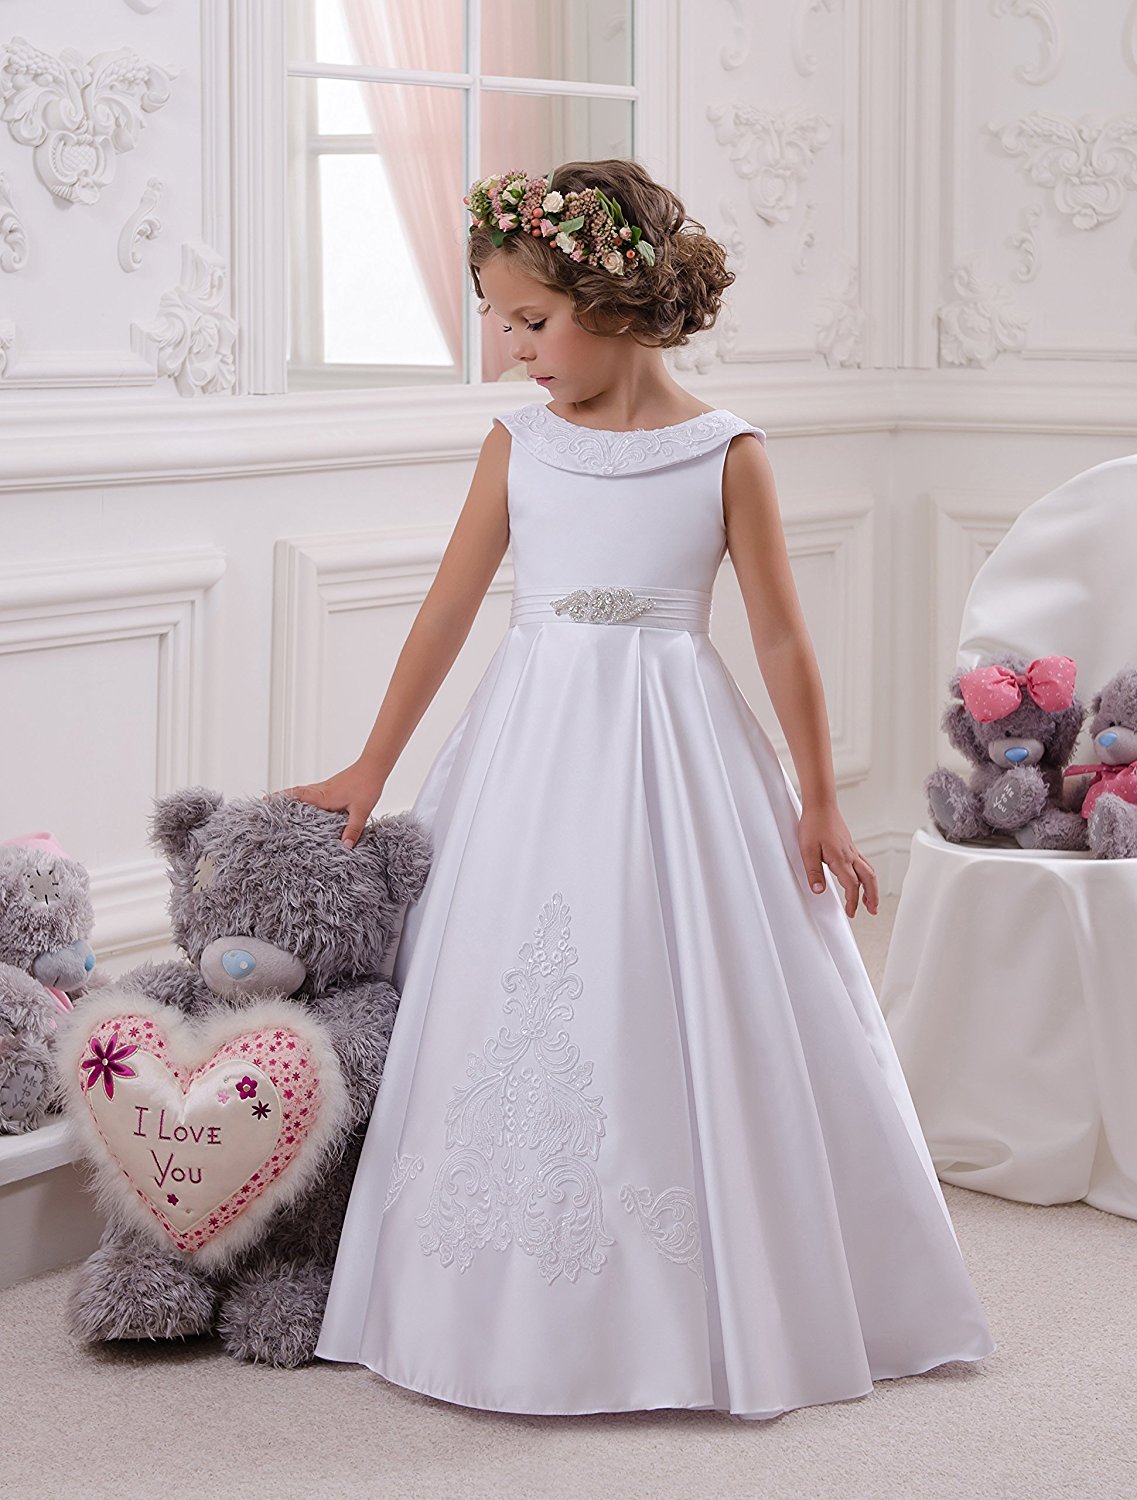 2023 Princess Dusty Blue Childrens Dress Floor Length Plffy Tulle Ball Gown  For Weddings, Pageants, Proms, Birthdays & Special Occasions From  Weddingpromgirl, $91.96 | DHgate.Com